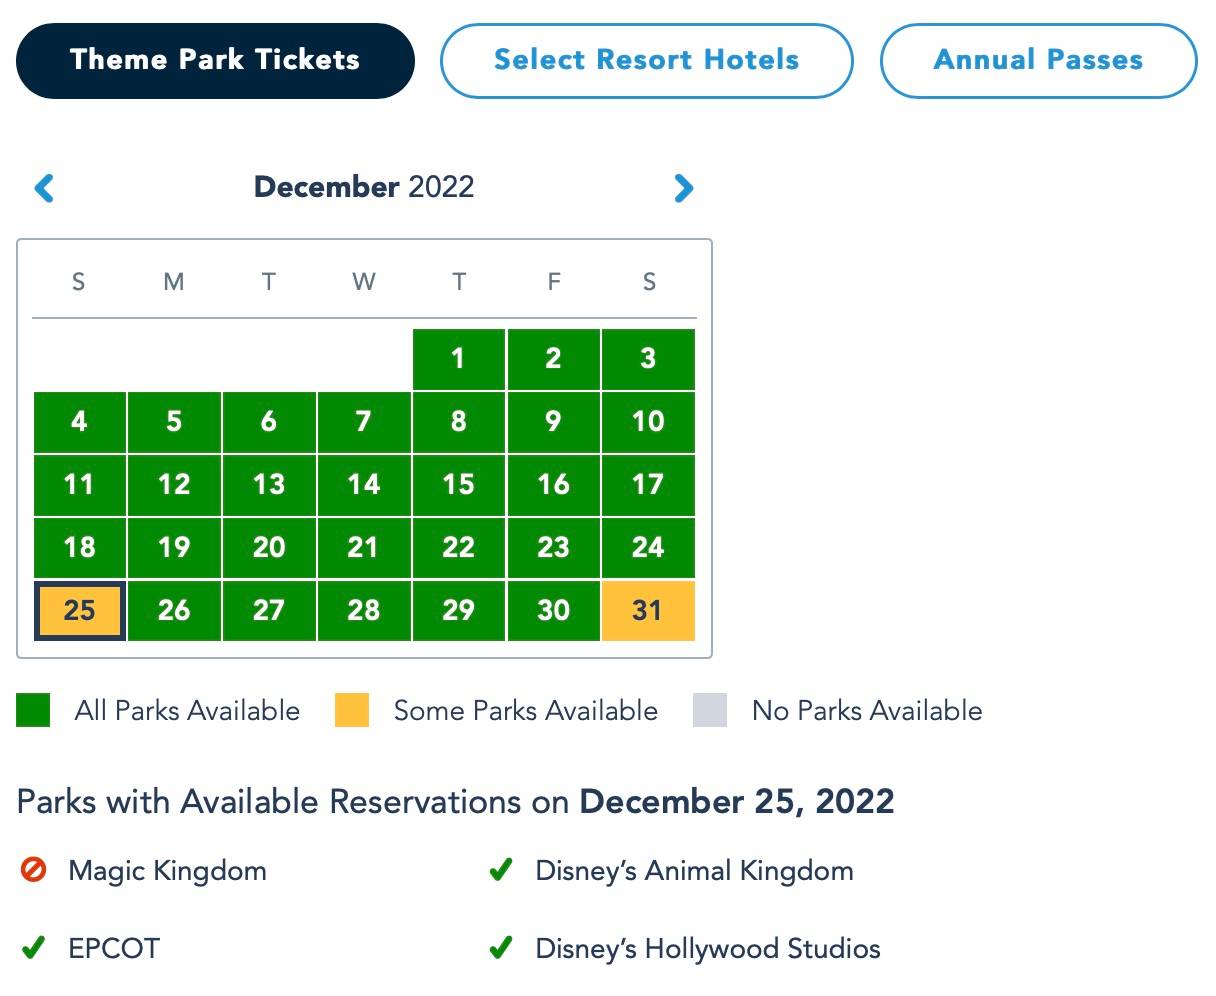 Disney Park Pass reservations at capacity for peak days during the Christmas week at Magic Kingdom